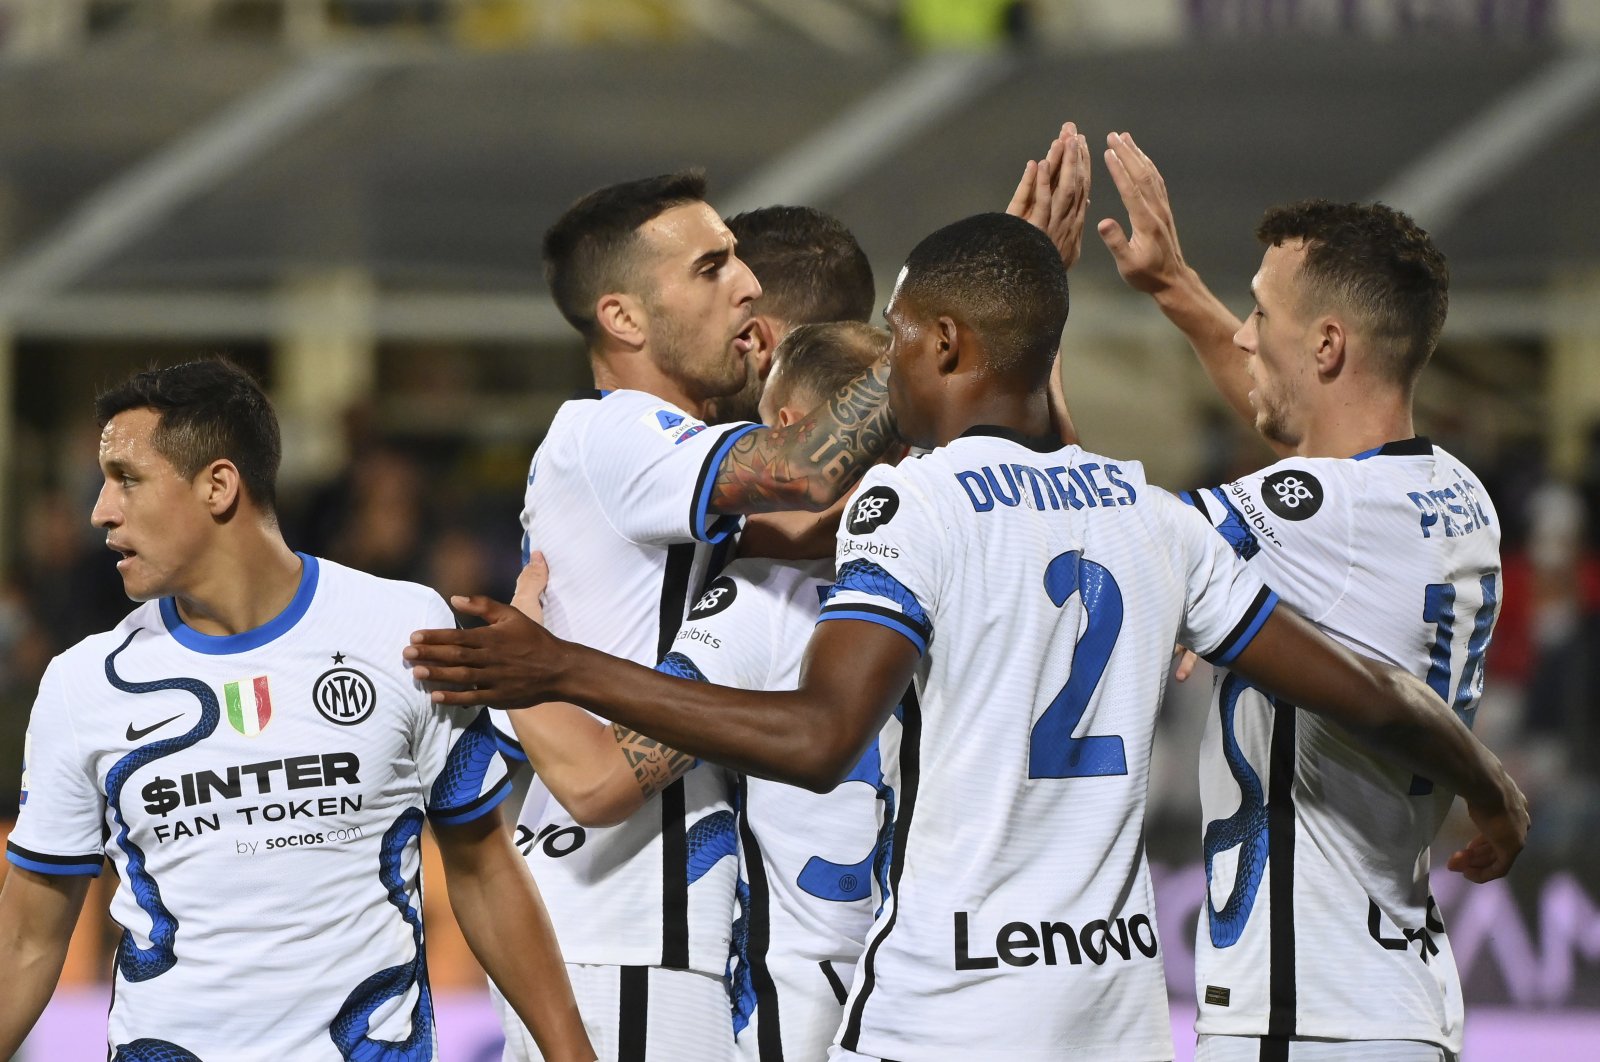 Inter Milan's Ivan Perisic (R) celebrates scoring with teammates in a Serie A match against Fiorentina at the Artemio Franchi stadium in Florence, Italy, Sept. 21, 2021. (AP Photo)